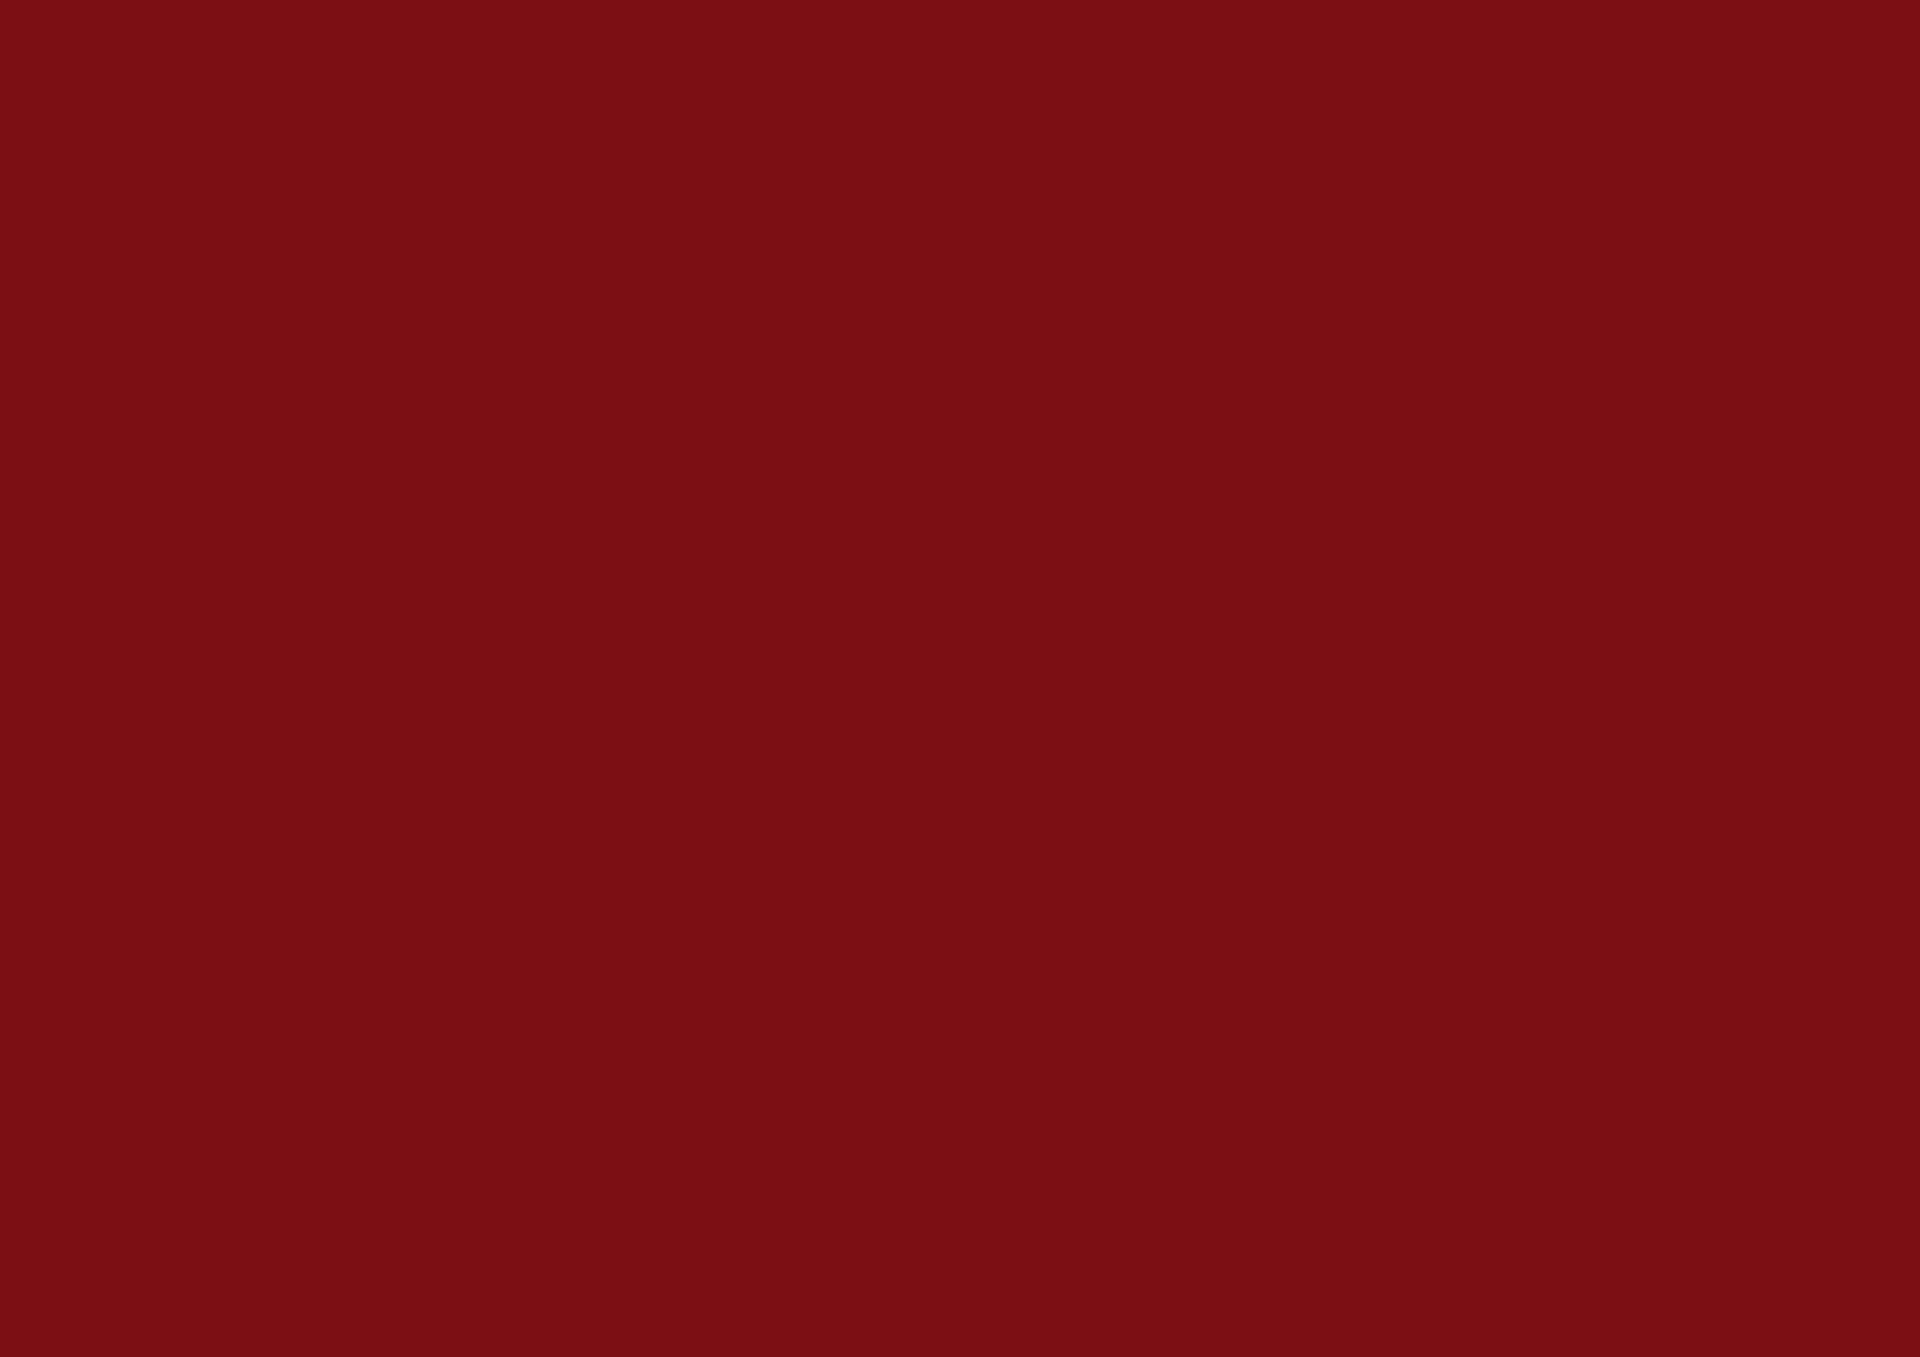 Awesome Maroon Color Wallpaper